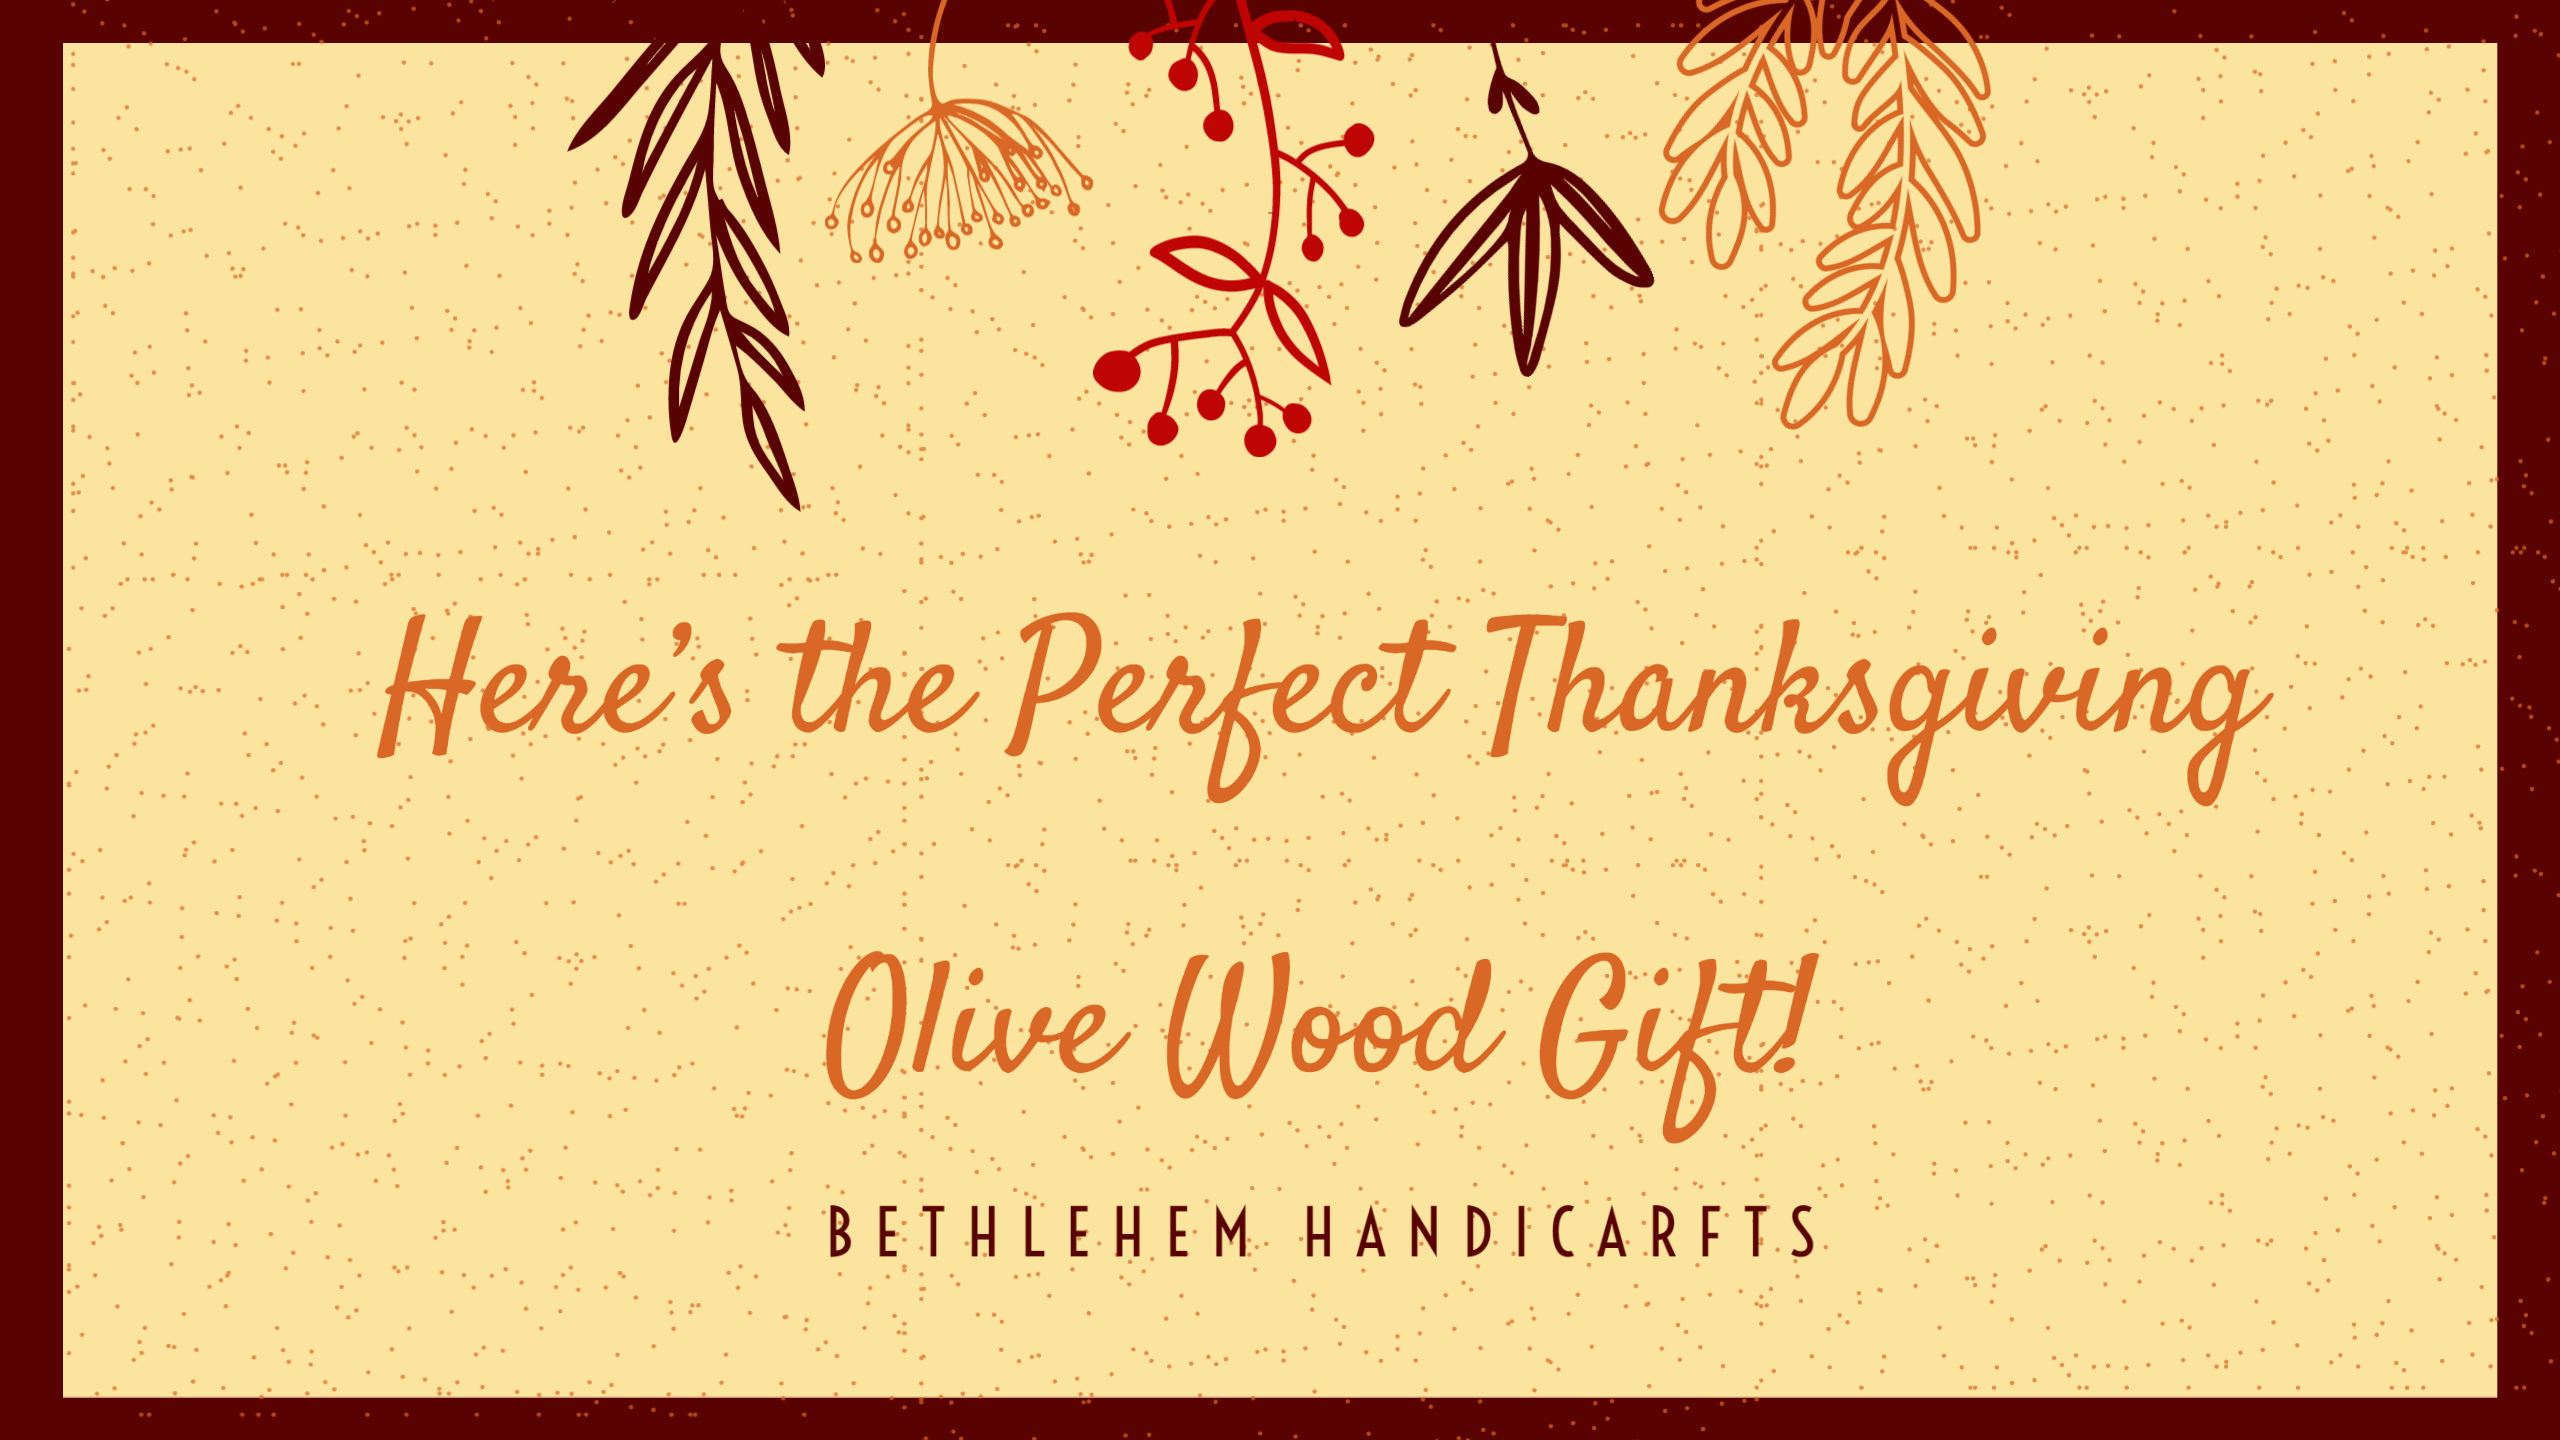 Here's the Perfect Thanksgiving Olive Wood Gift!